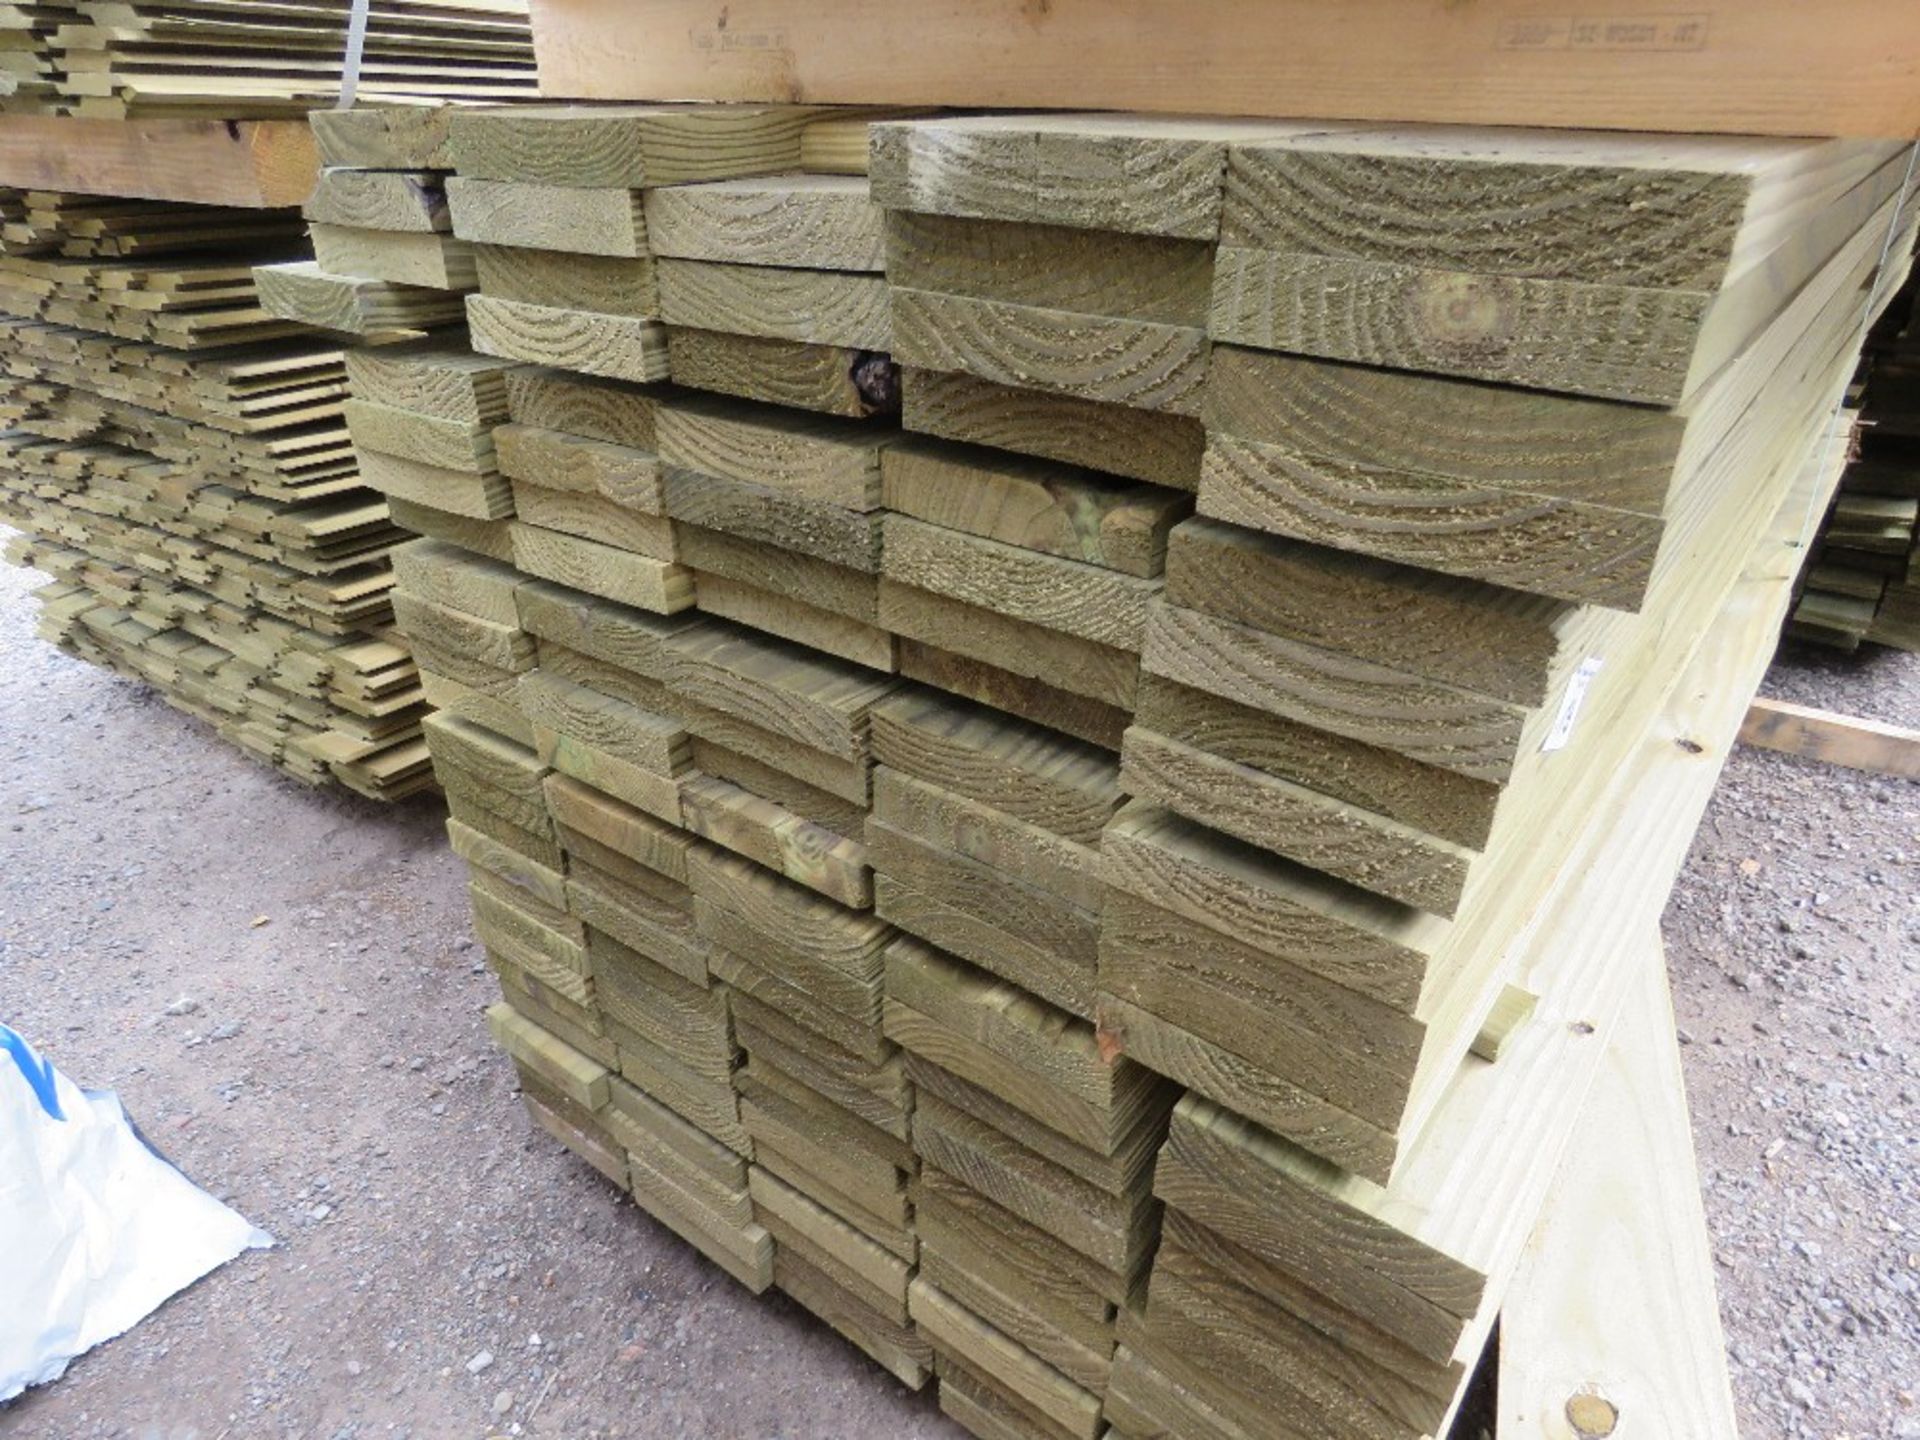 PACK OF PRESSURE TREATED TIMBER BOARDS 140MM X 30MM APPROX @ 1.83M LENGTH. 124NO IN TOTAL APPROX. - Image 2 of 3